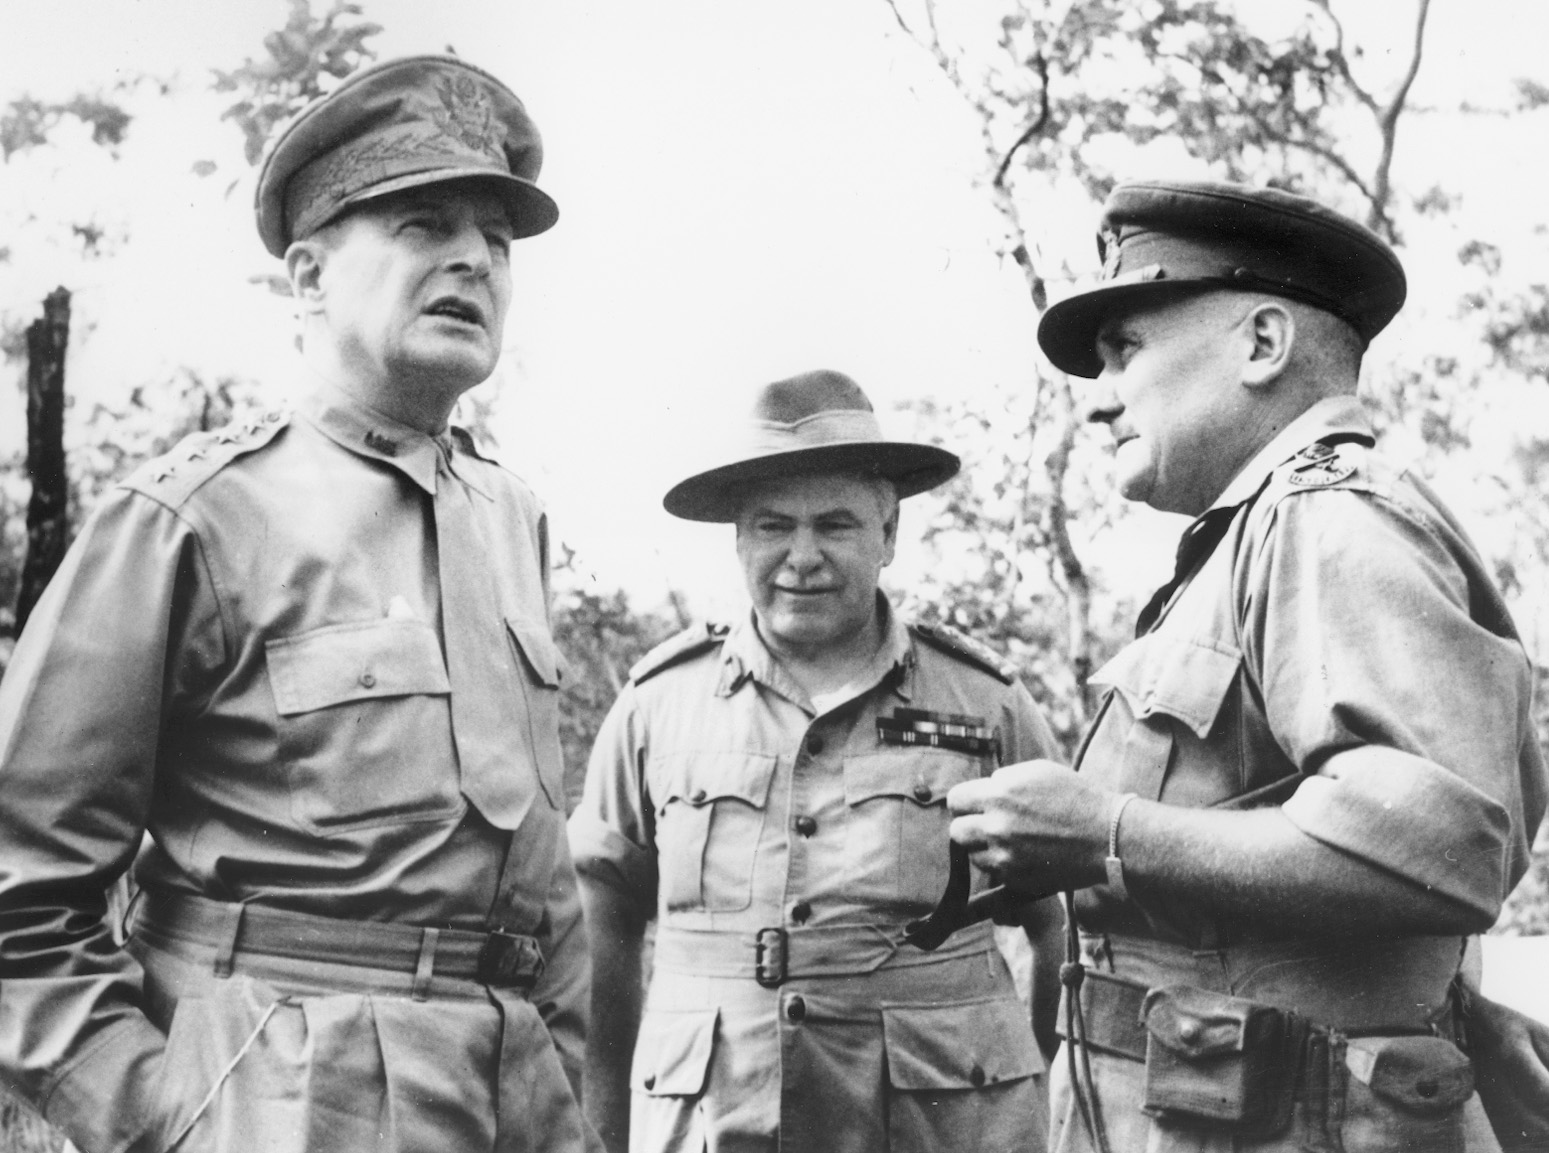 Douglas MacArthur visits the Kokoda Track for the first time, here conferring with General Sir Thomas Blamey and Maj. Gen. G.S. Allen.